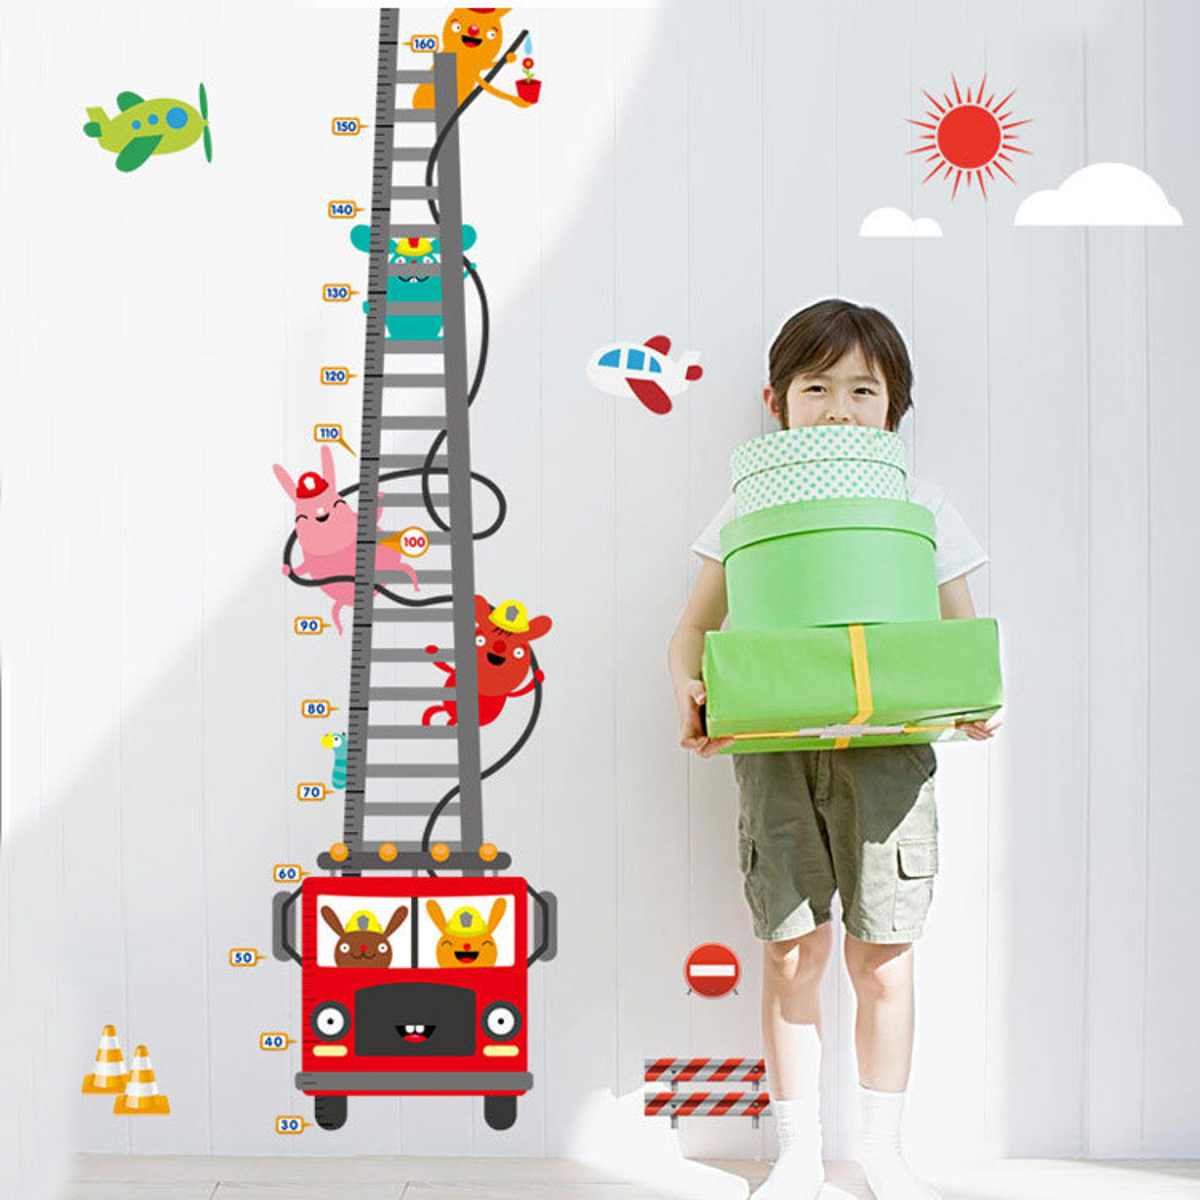 

1Pcs Cute Truck Height Measure Wall Sticker Mural Decals Home Room Decoration Child Growth Chart Toys